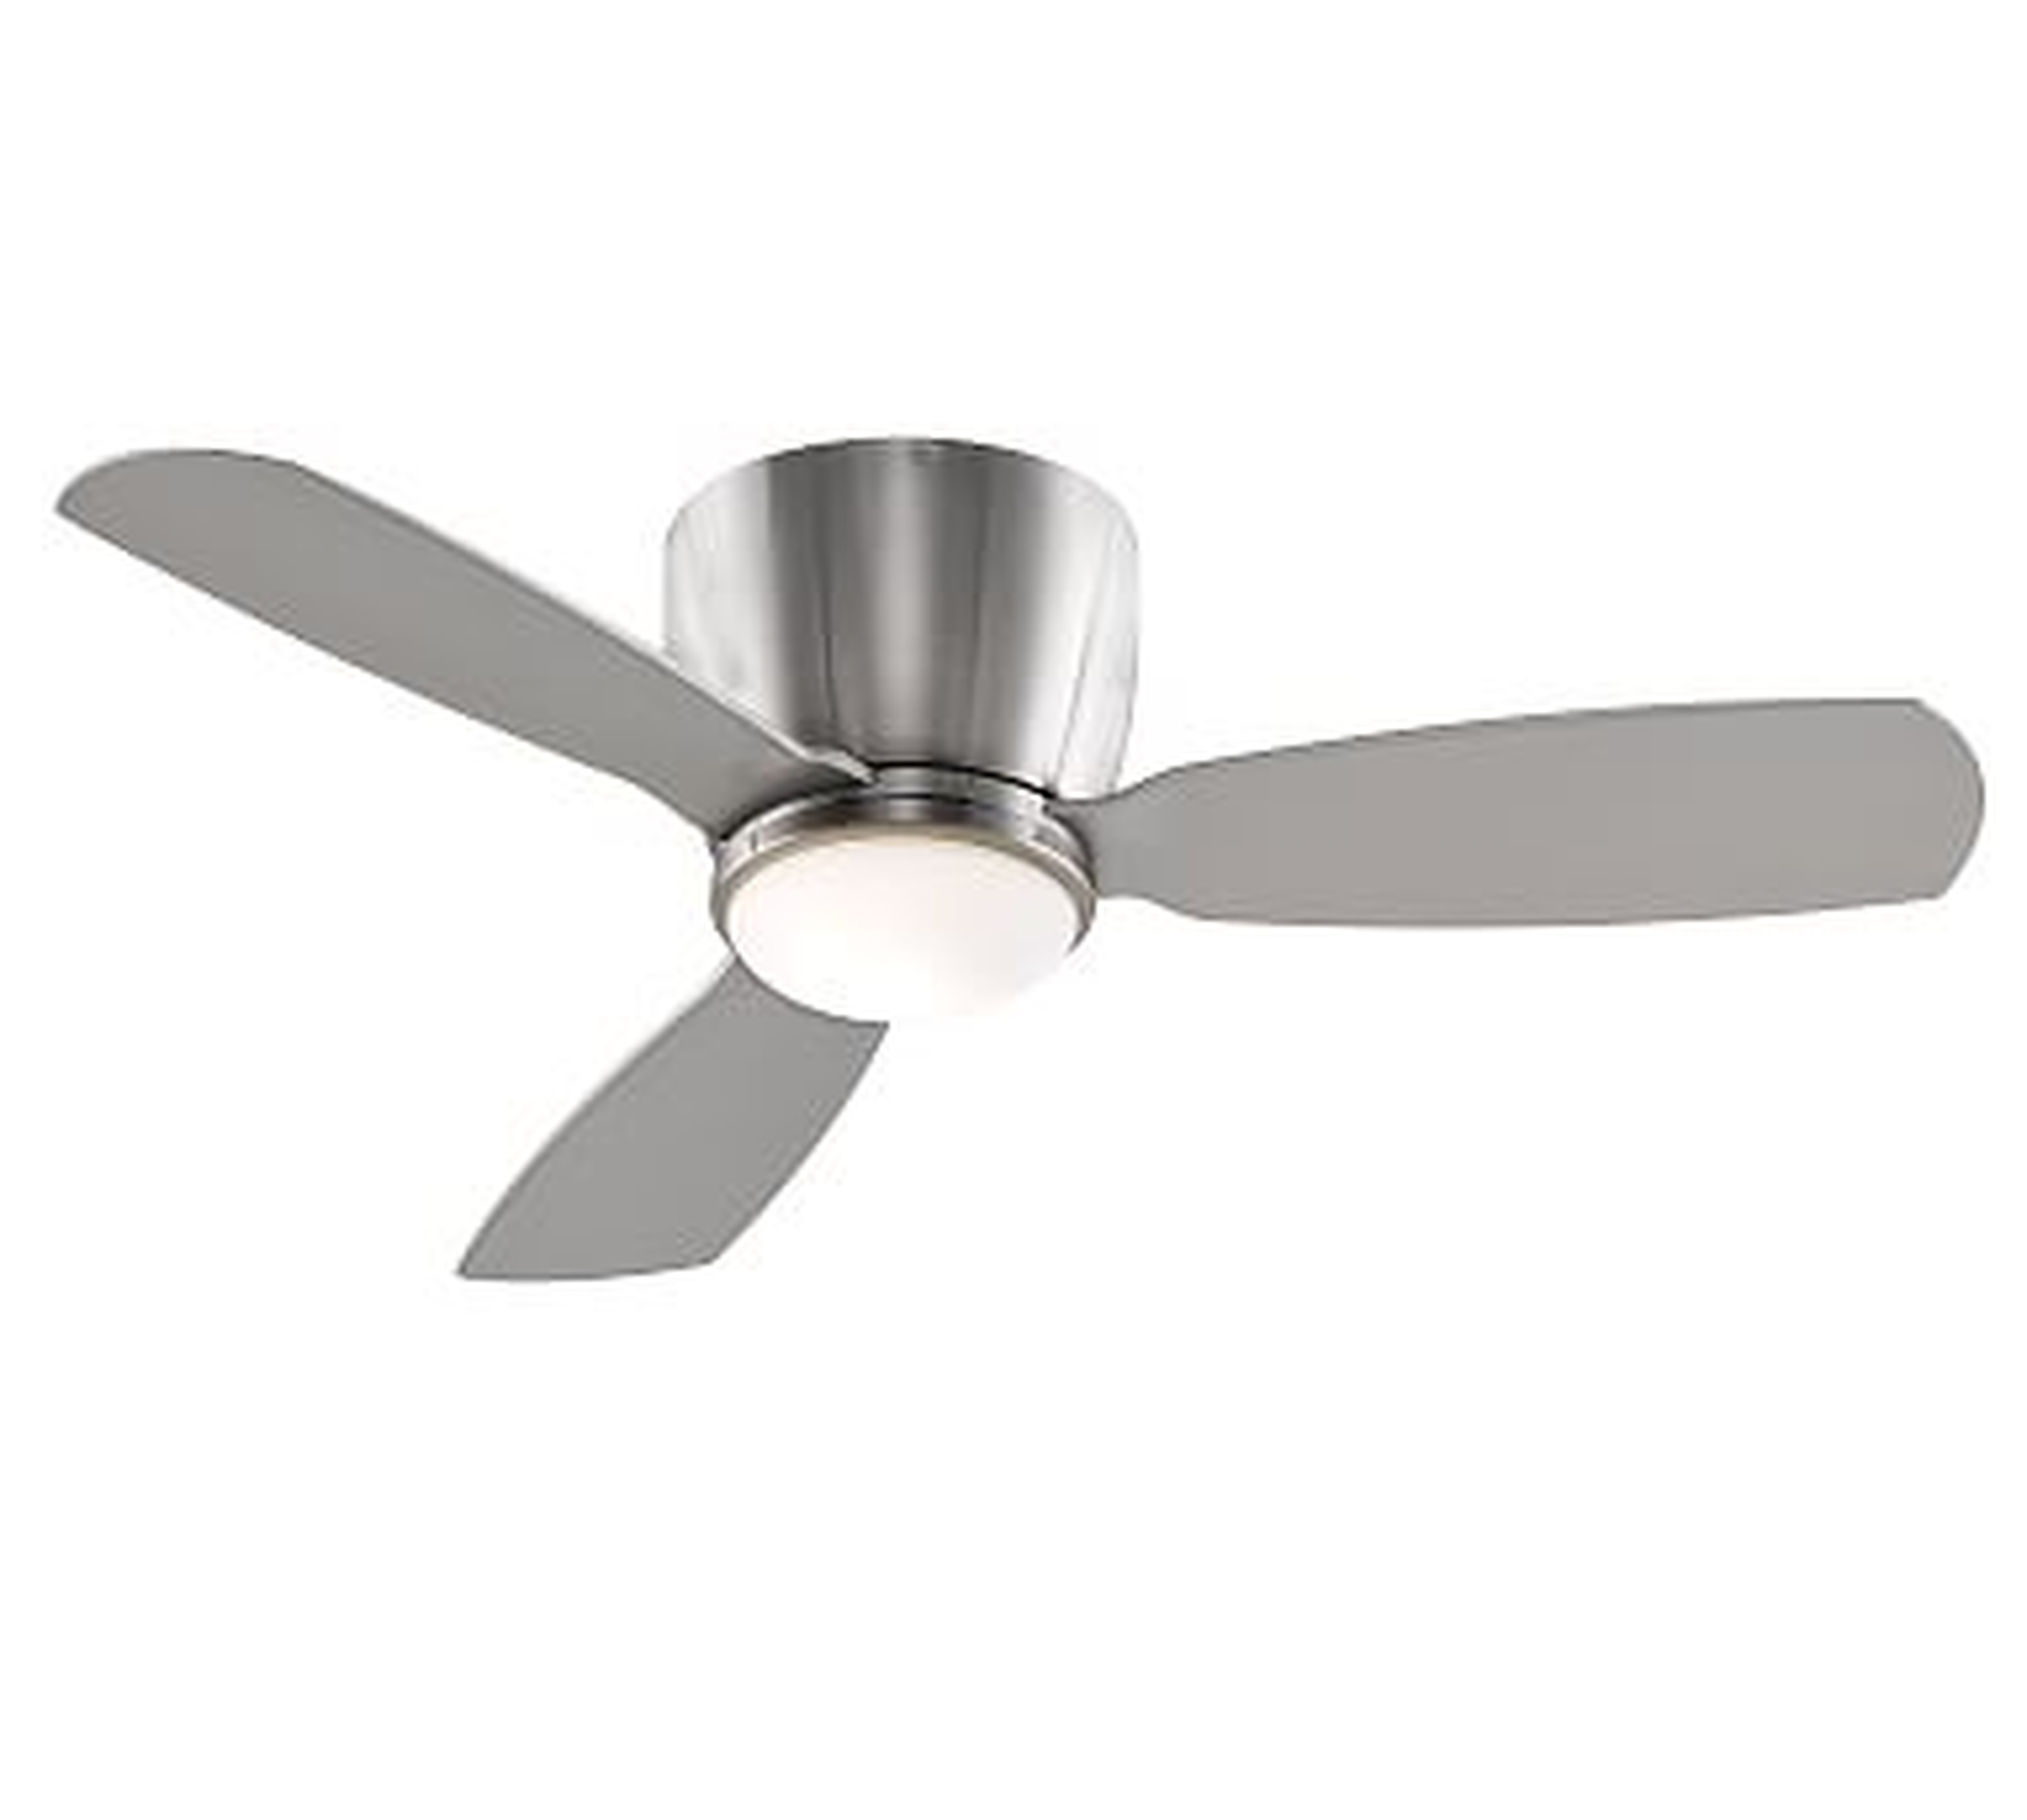 Embrace Ceiling Fan, Brushed Nickel with Brushed Nickel Blades - Pottery Barn